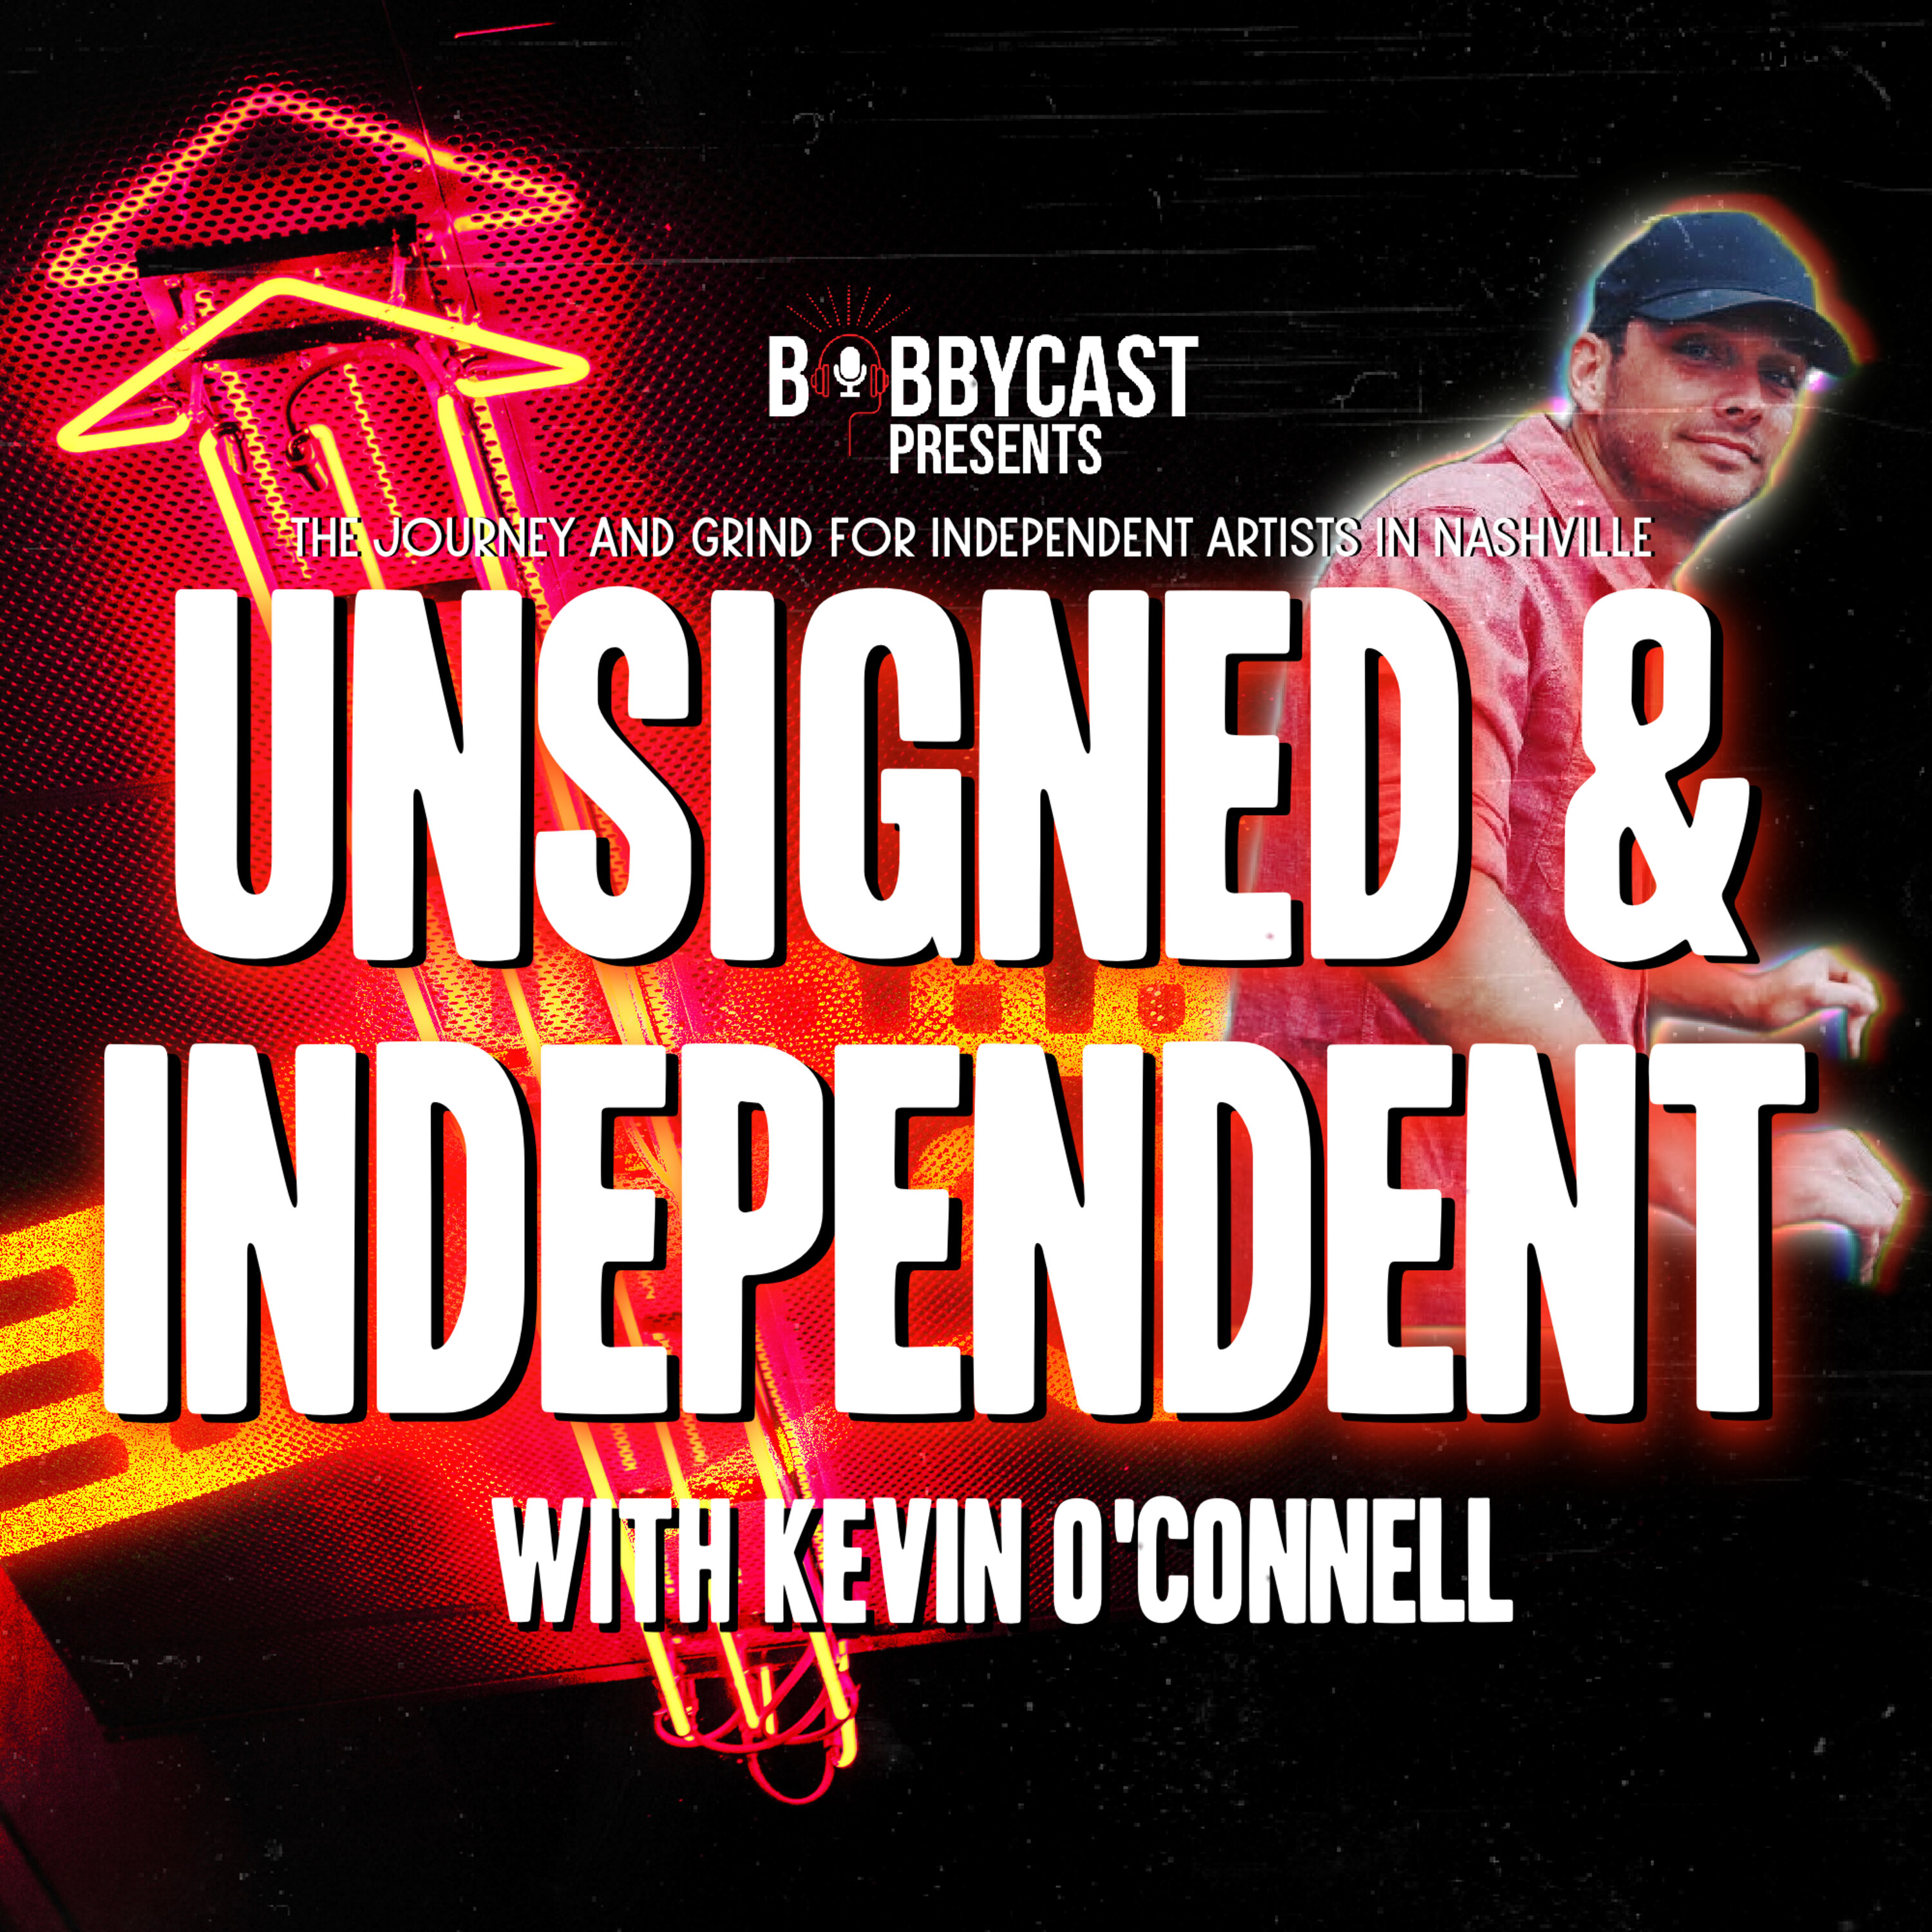 BobbyCast Presents: Unsigned & Independent: Lexie Hayden - From Intern to Full Time Artist